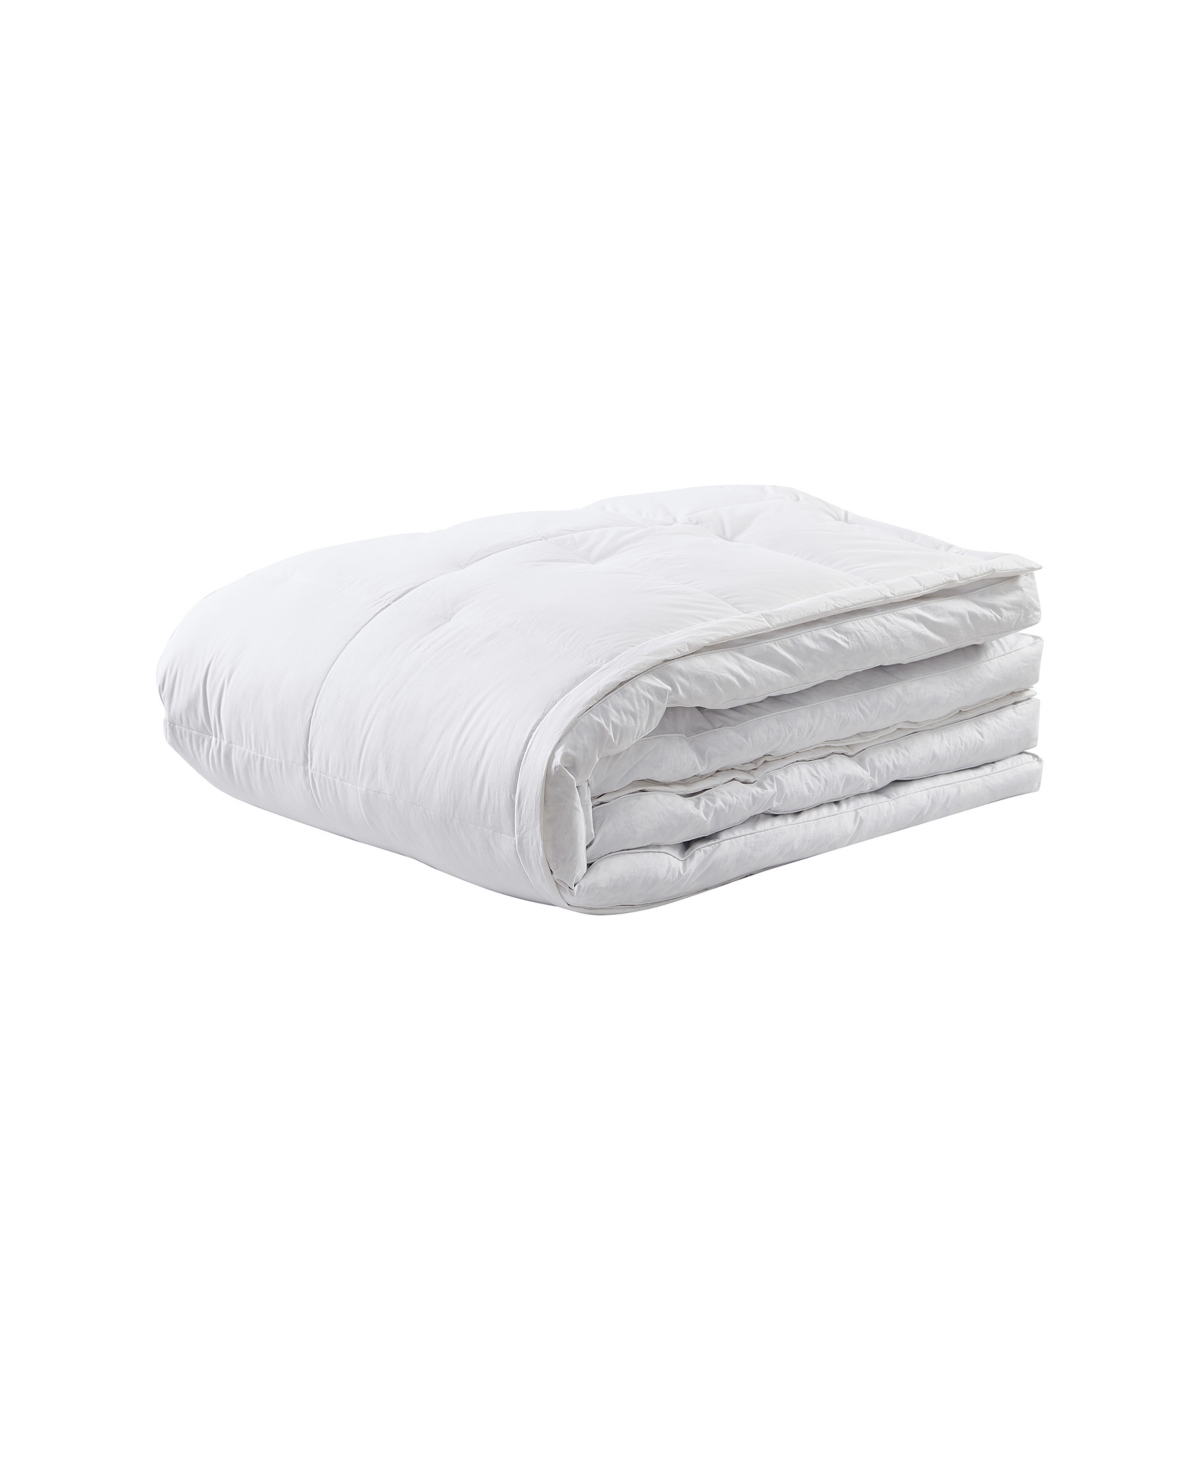 Serta Heiq Cooling 3" White Downtop Featherbeds, California King